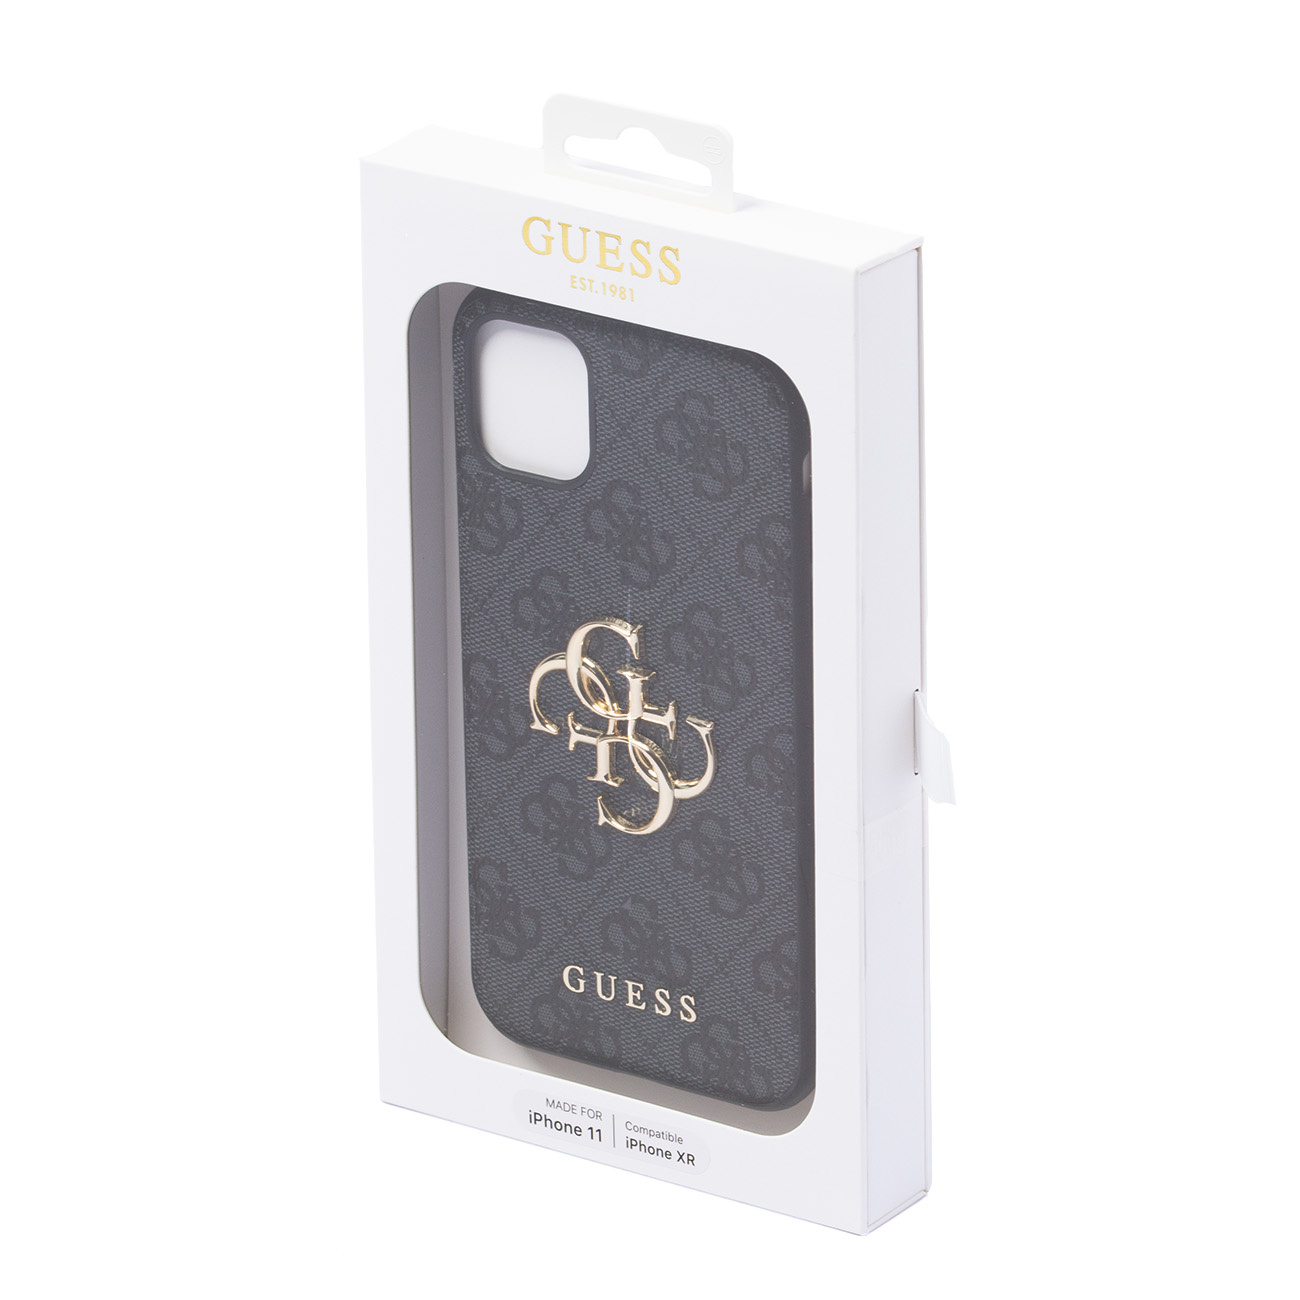 Box for Guess iPhone 11 / XR 4G Big Metal Logo case